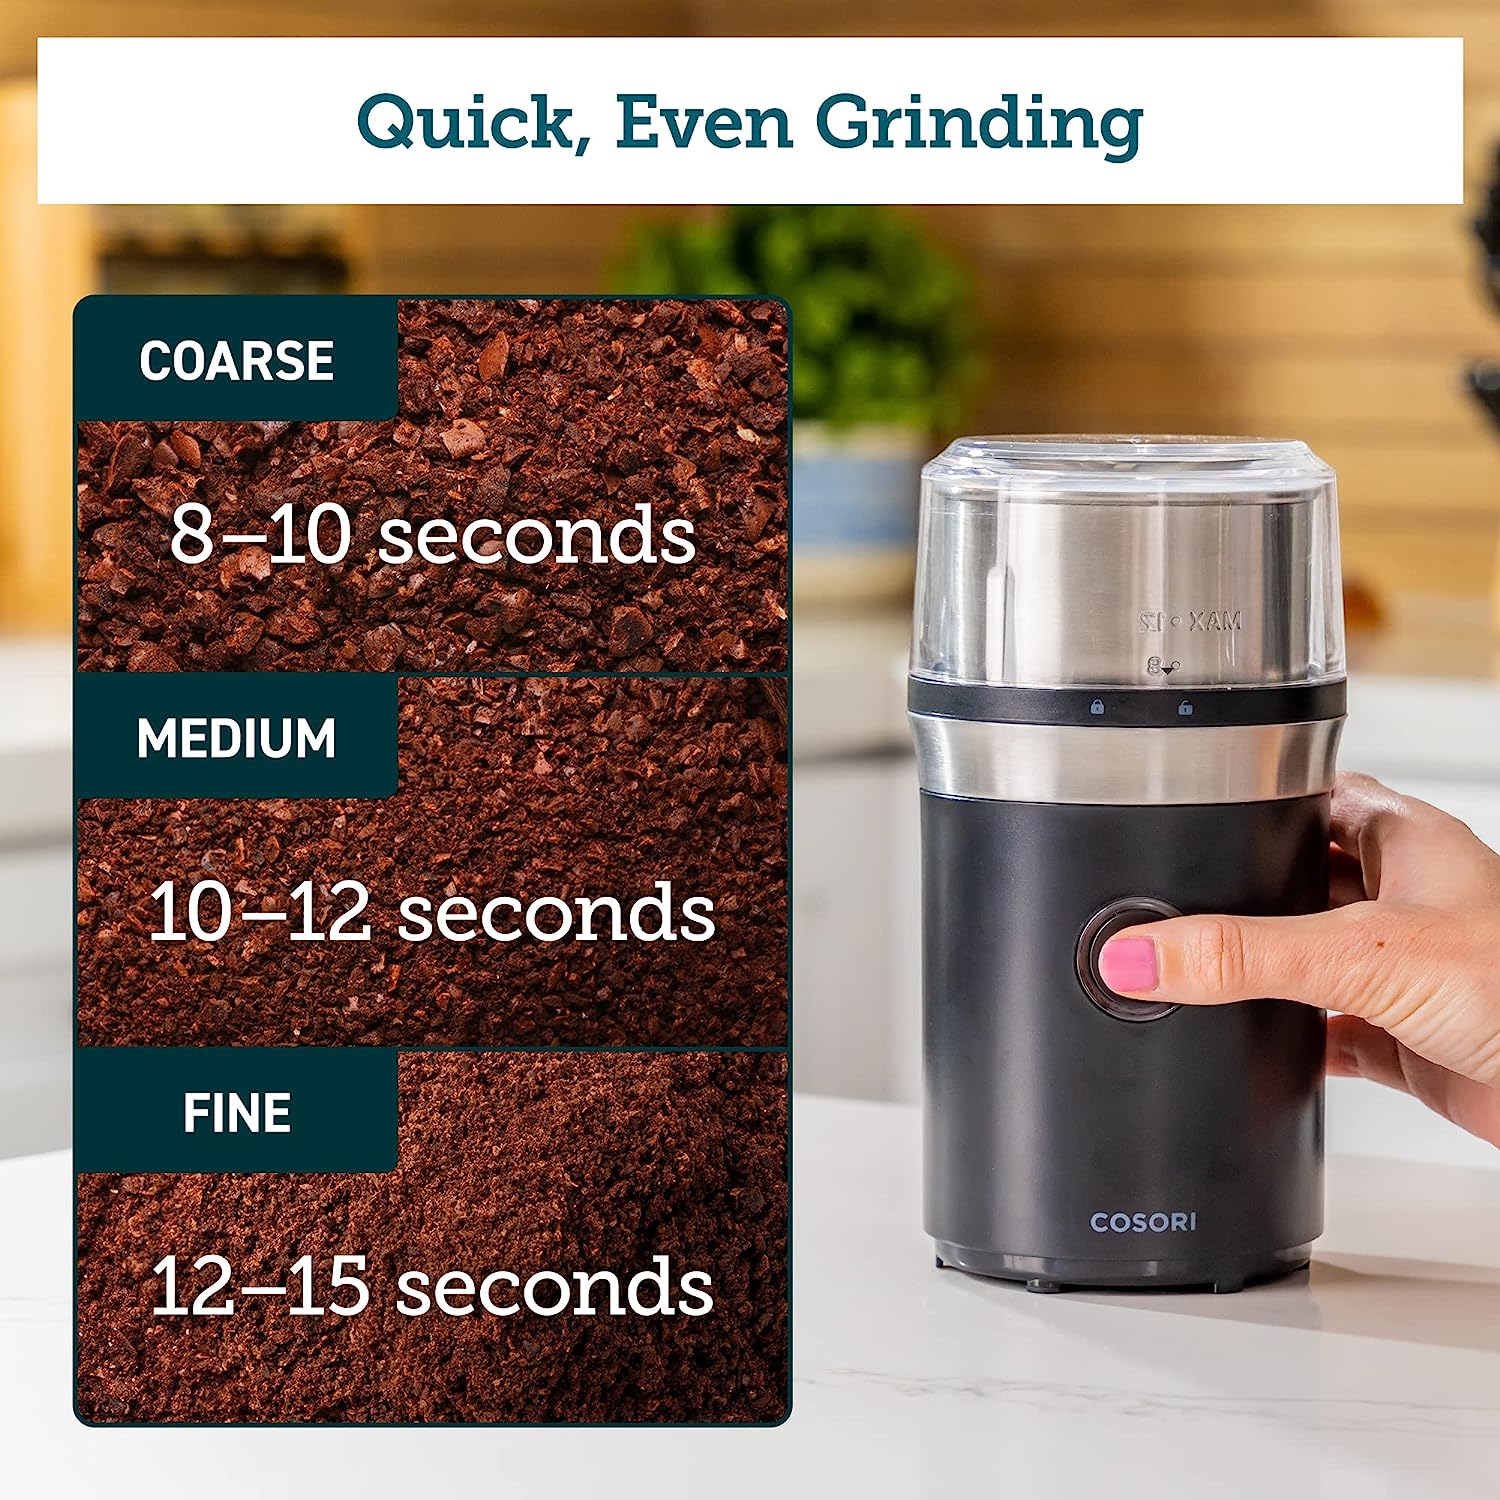 https://bigbigmart.com/wp-content/uploads/2023/10/COSORI-Electric-Coffee-Grinders-for-Spices-Seeds-Herbs-and-Coffee-Beans-Spice-Blender-and-Espresso-Grinder-Wet-and-Dry-Grinder-Included-2-Removable-Stainless-Steel-Bowls-Black3-1.jpg